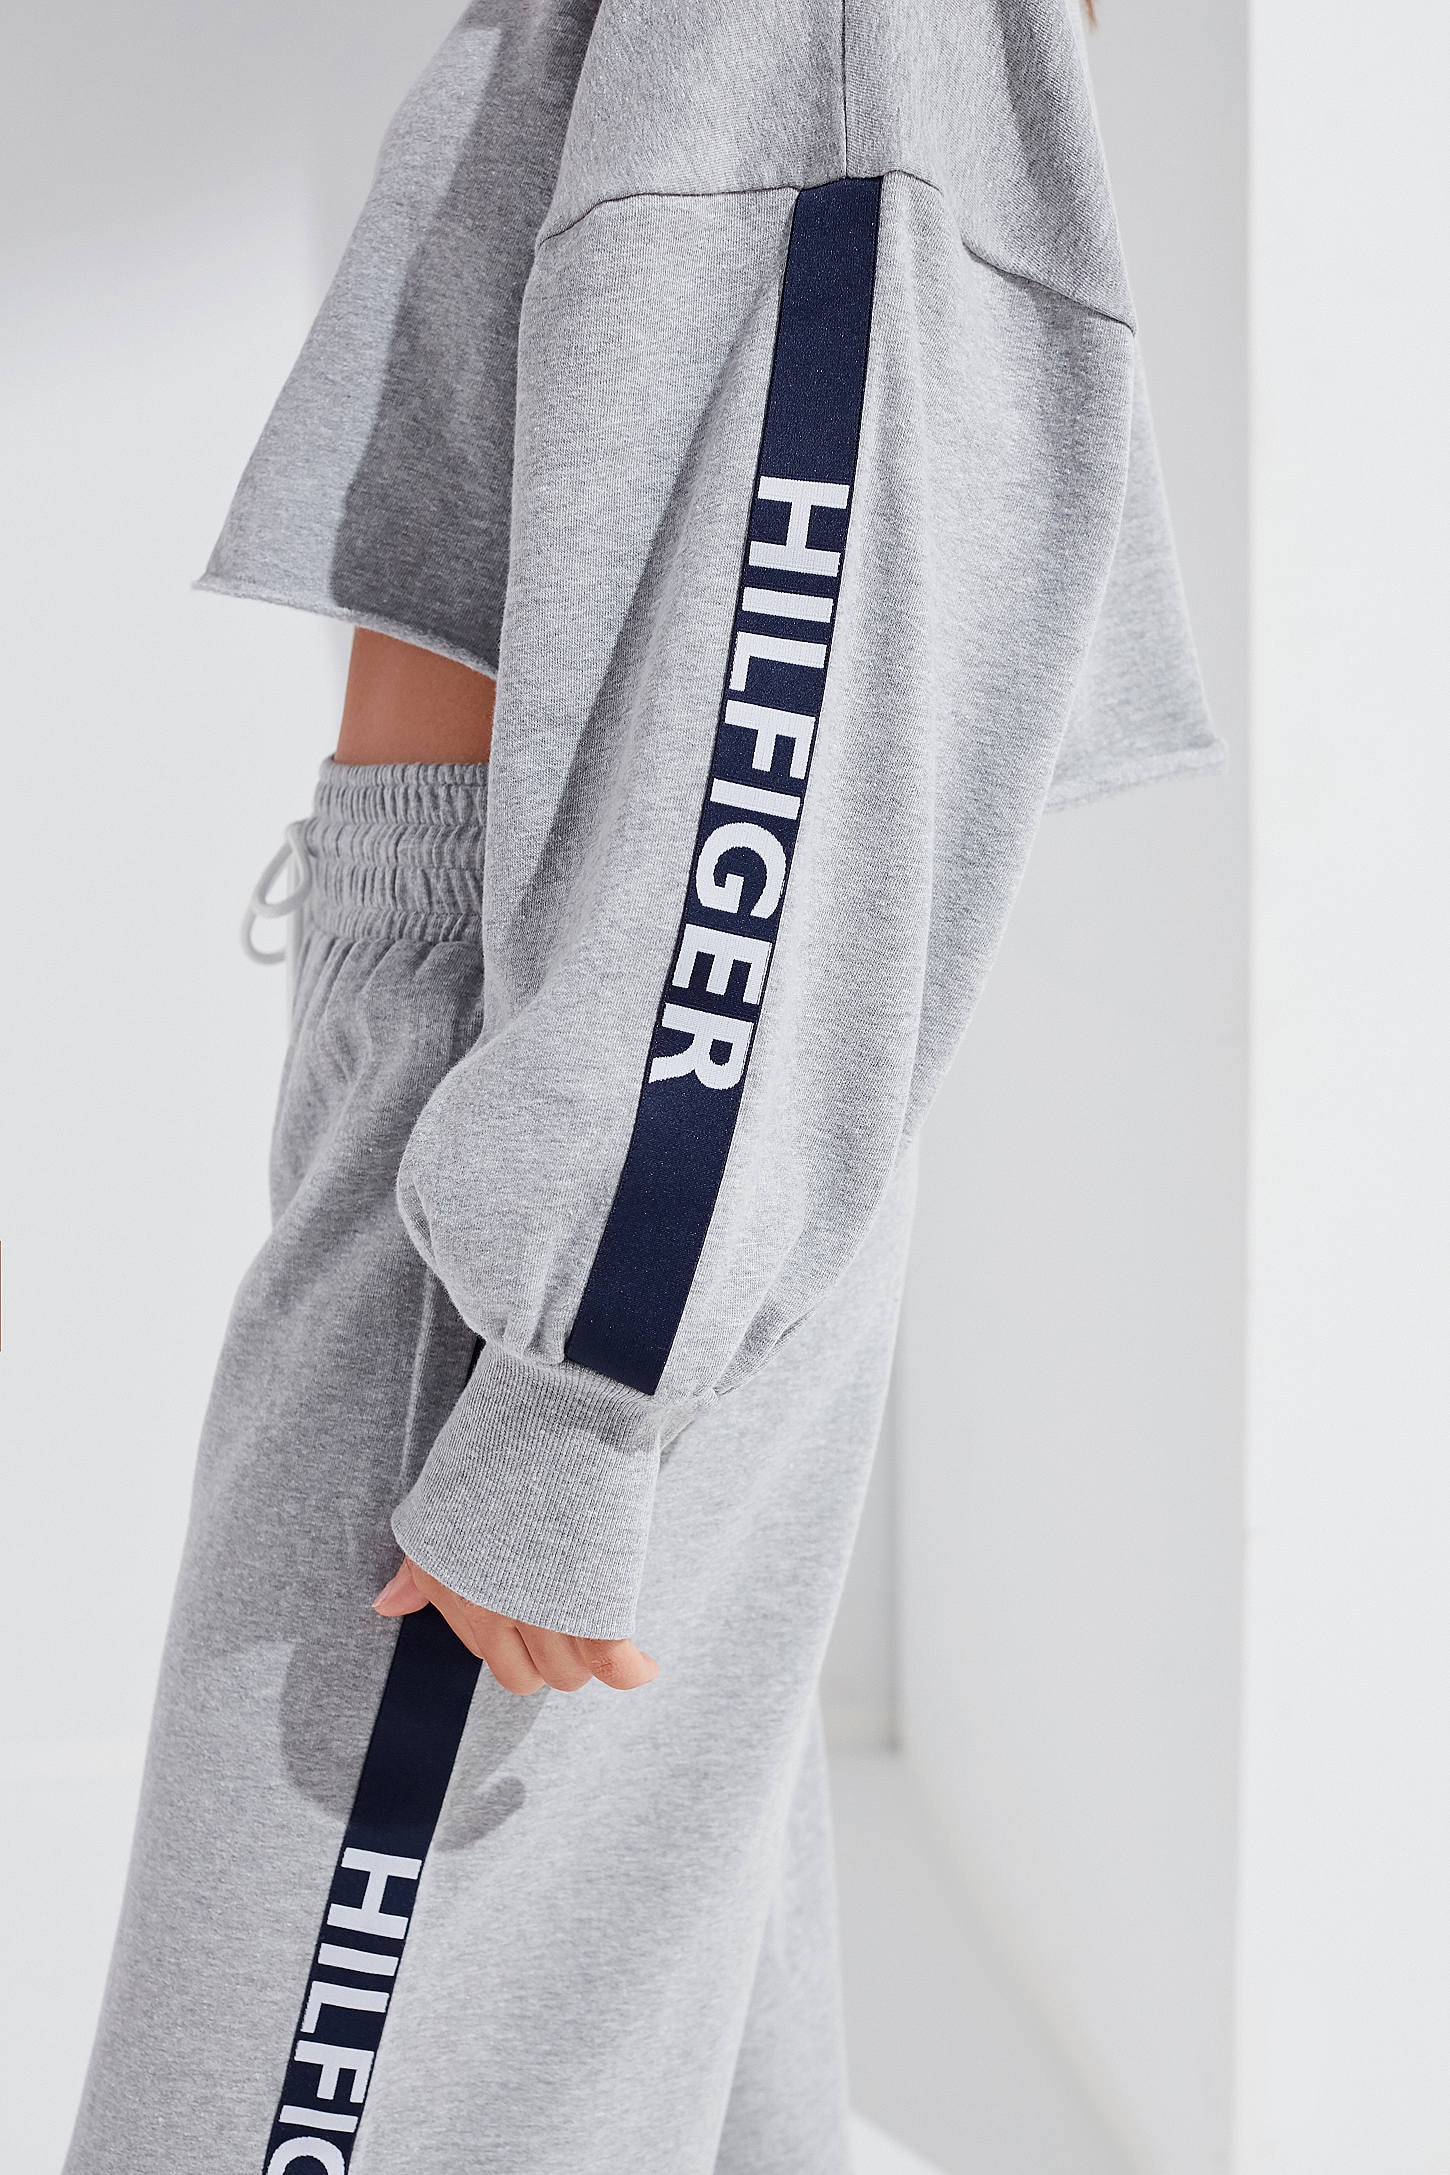 Tommy Hilfiger x Urban Outfitters Logo Set